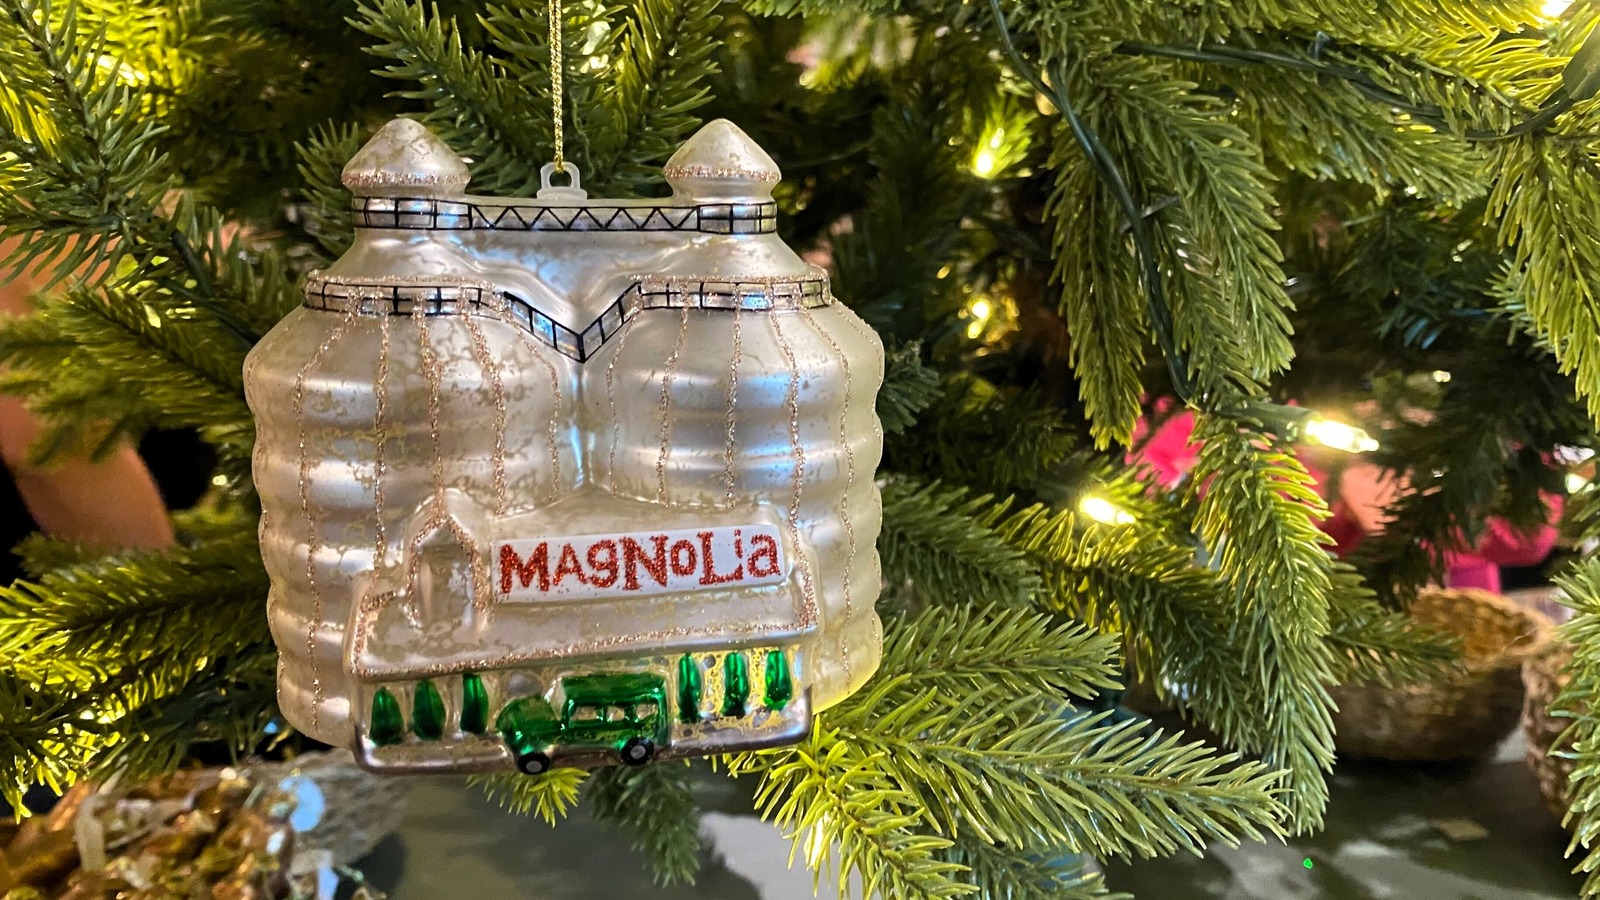 https://www.housedigest.com/img/gallery/bring-a-vintage-feel-to-your-tree-this-year-with-magnolias-holiday-ornament-collection/l-intro-1698249310.jpg